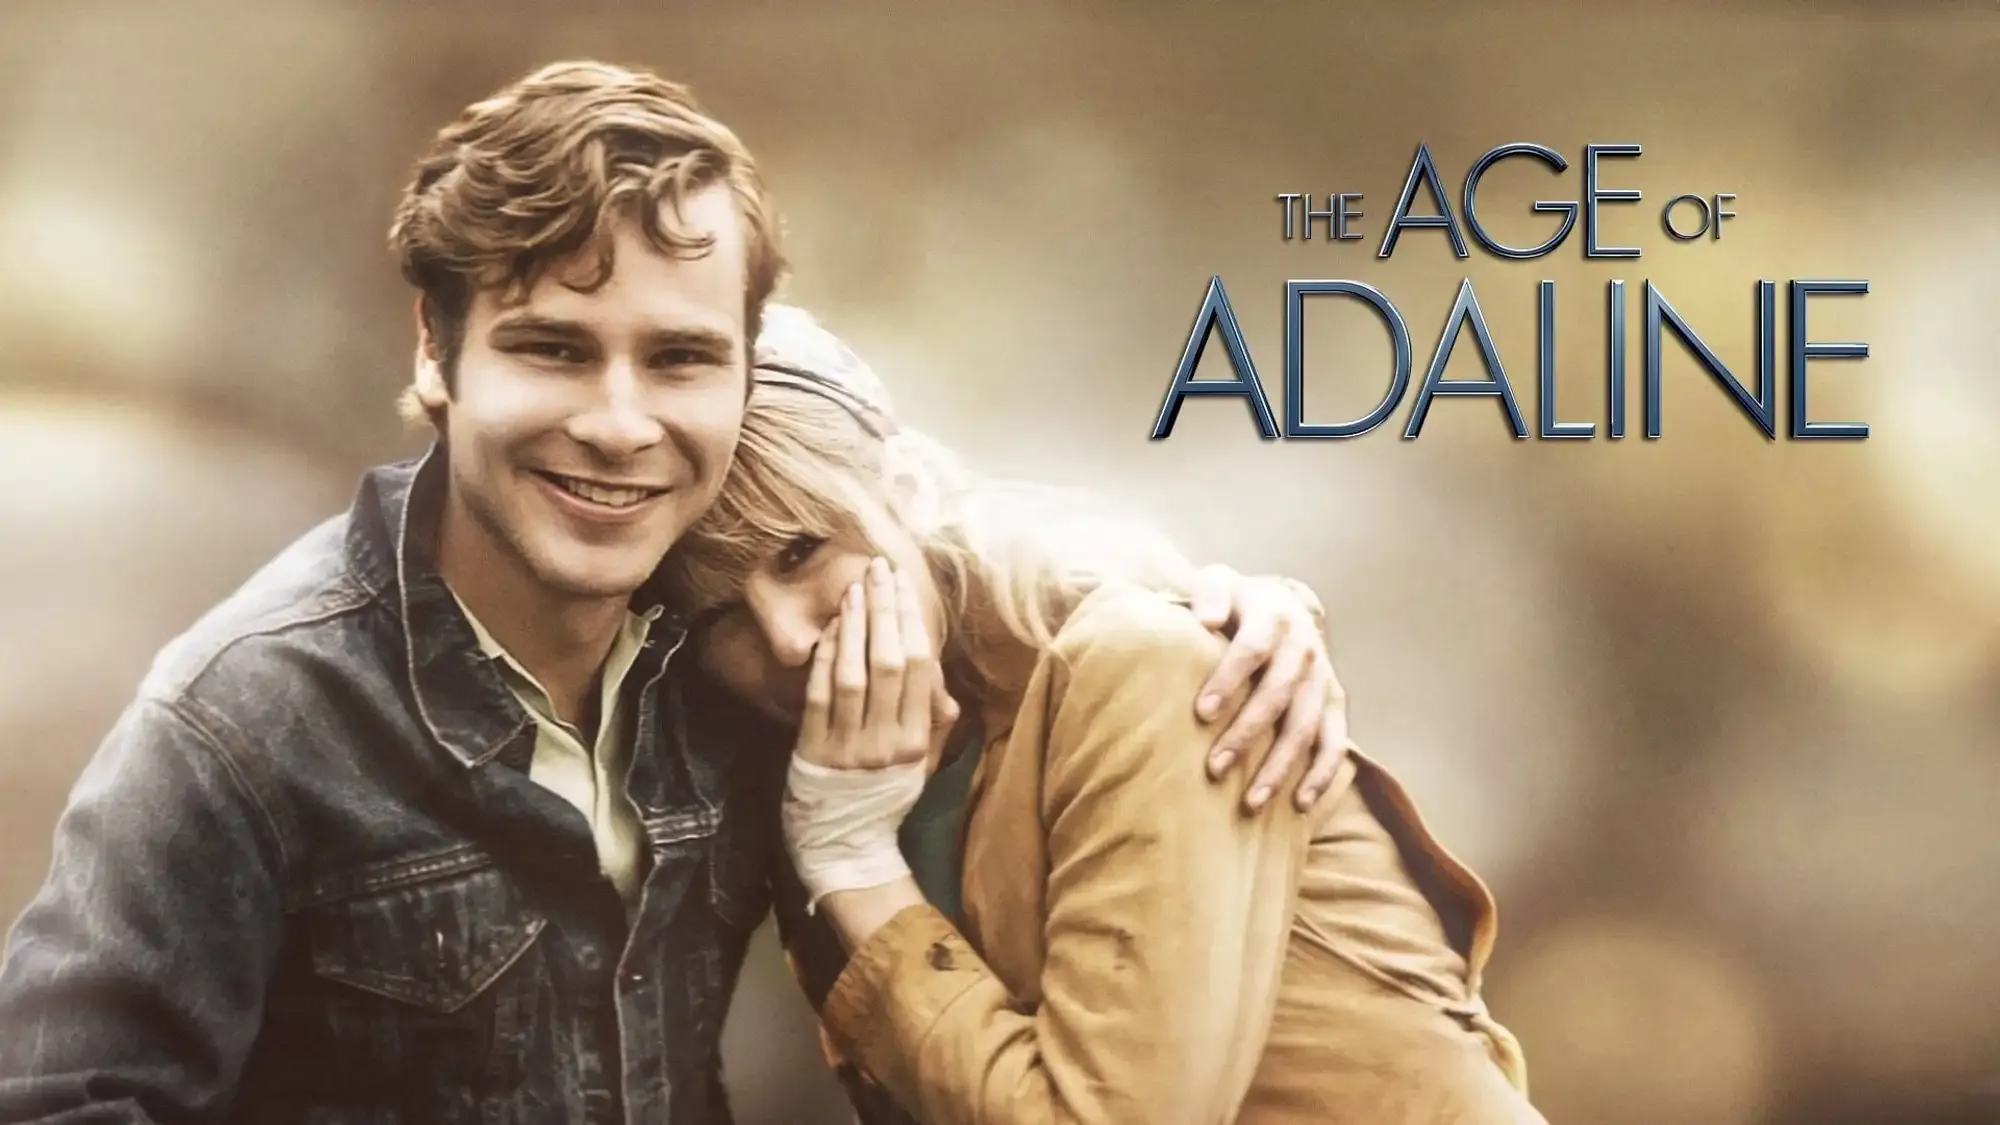 The Age of Adaline movie review